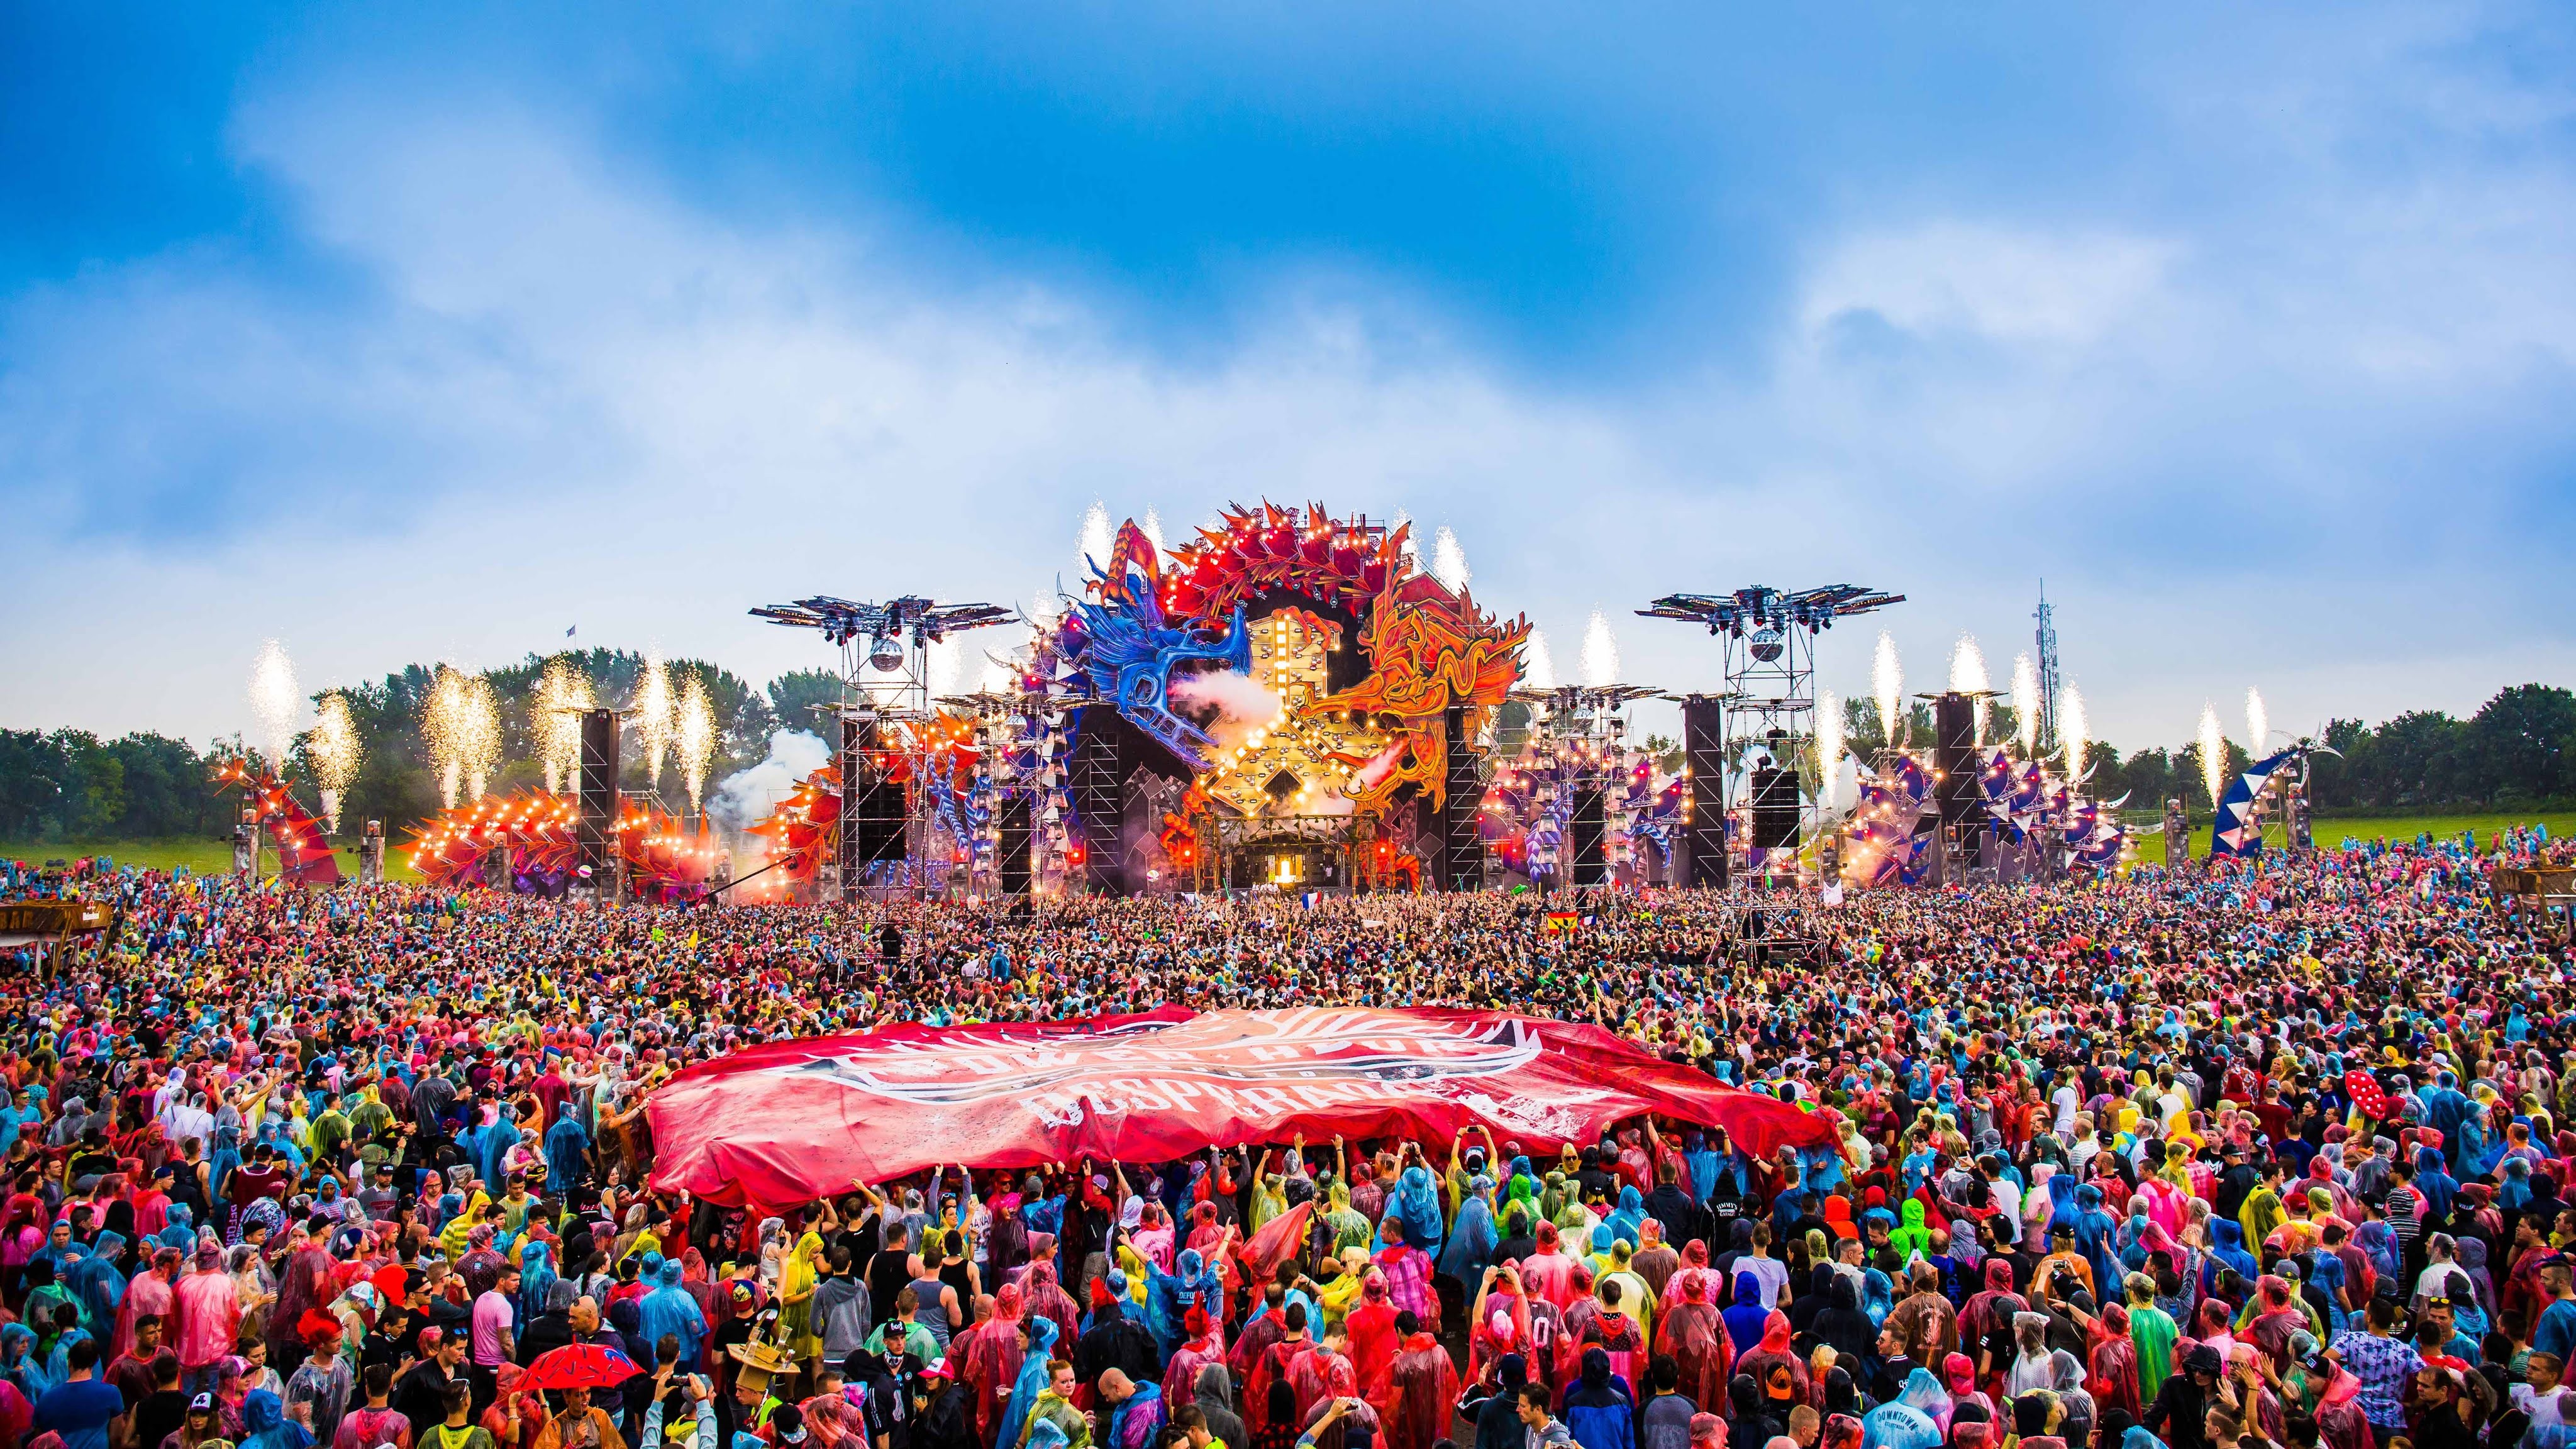 Defqon 1 Hardstyle People Music Colorful 4096x2304